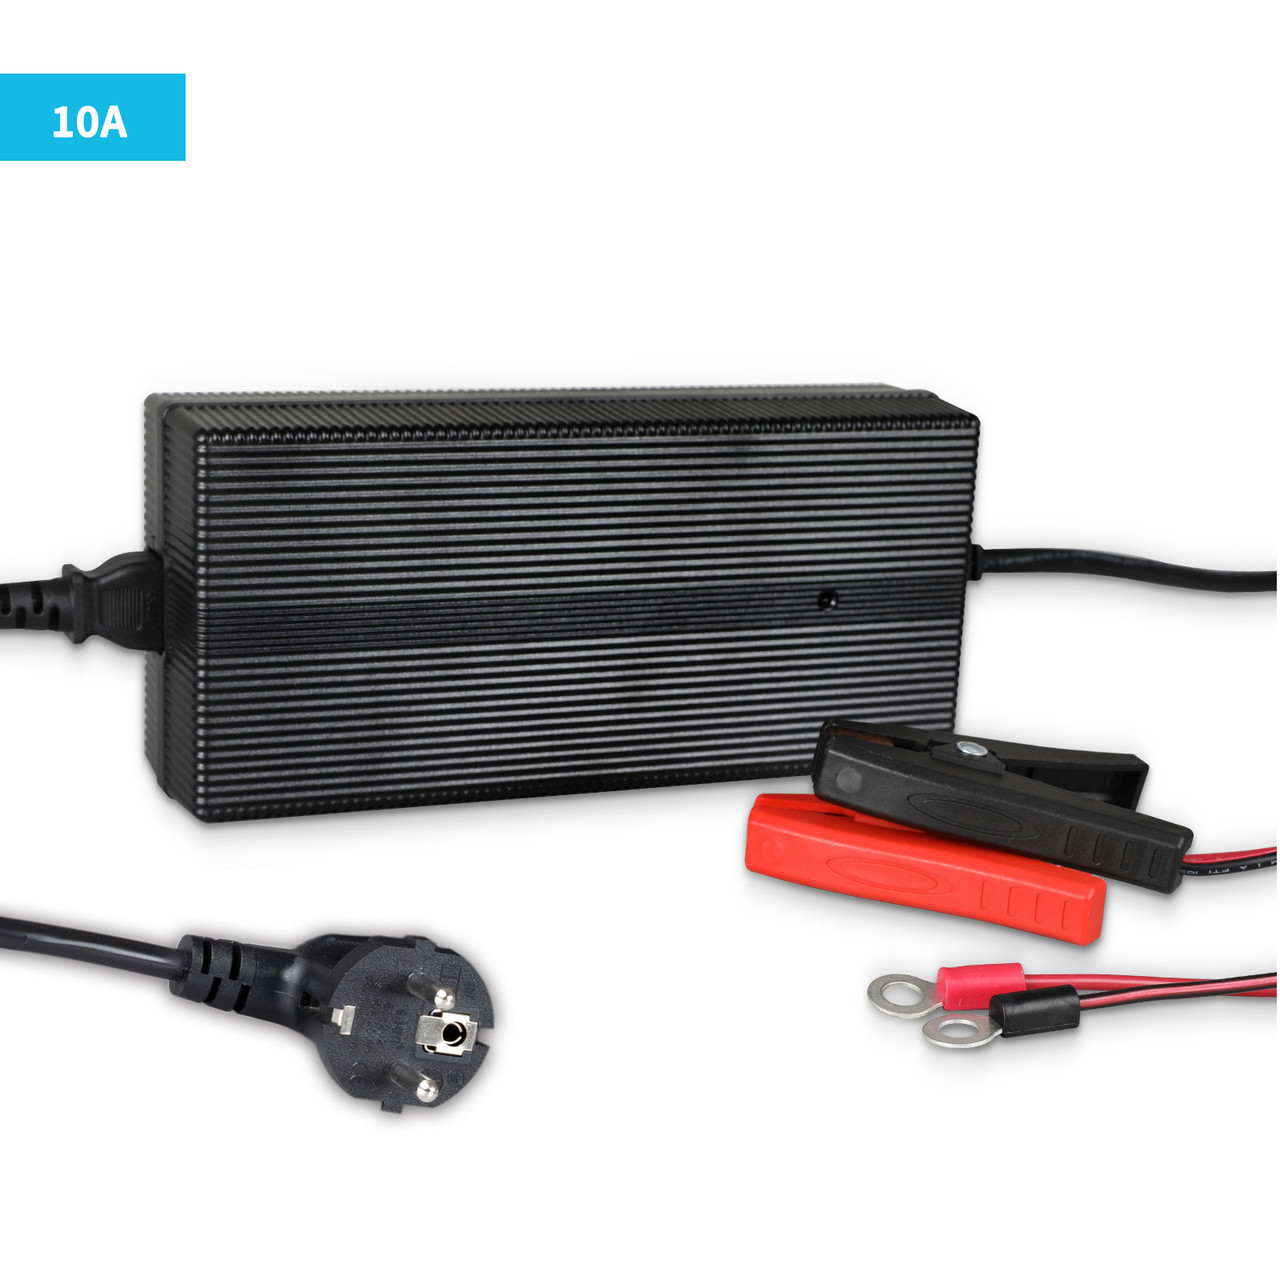 BATTERIE LITHIUM OFFBOARB CAMPING-CAR 12v -400 A + CHAGEUR DC-DC